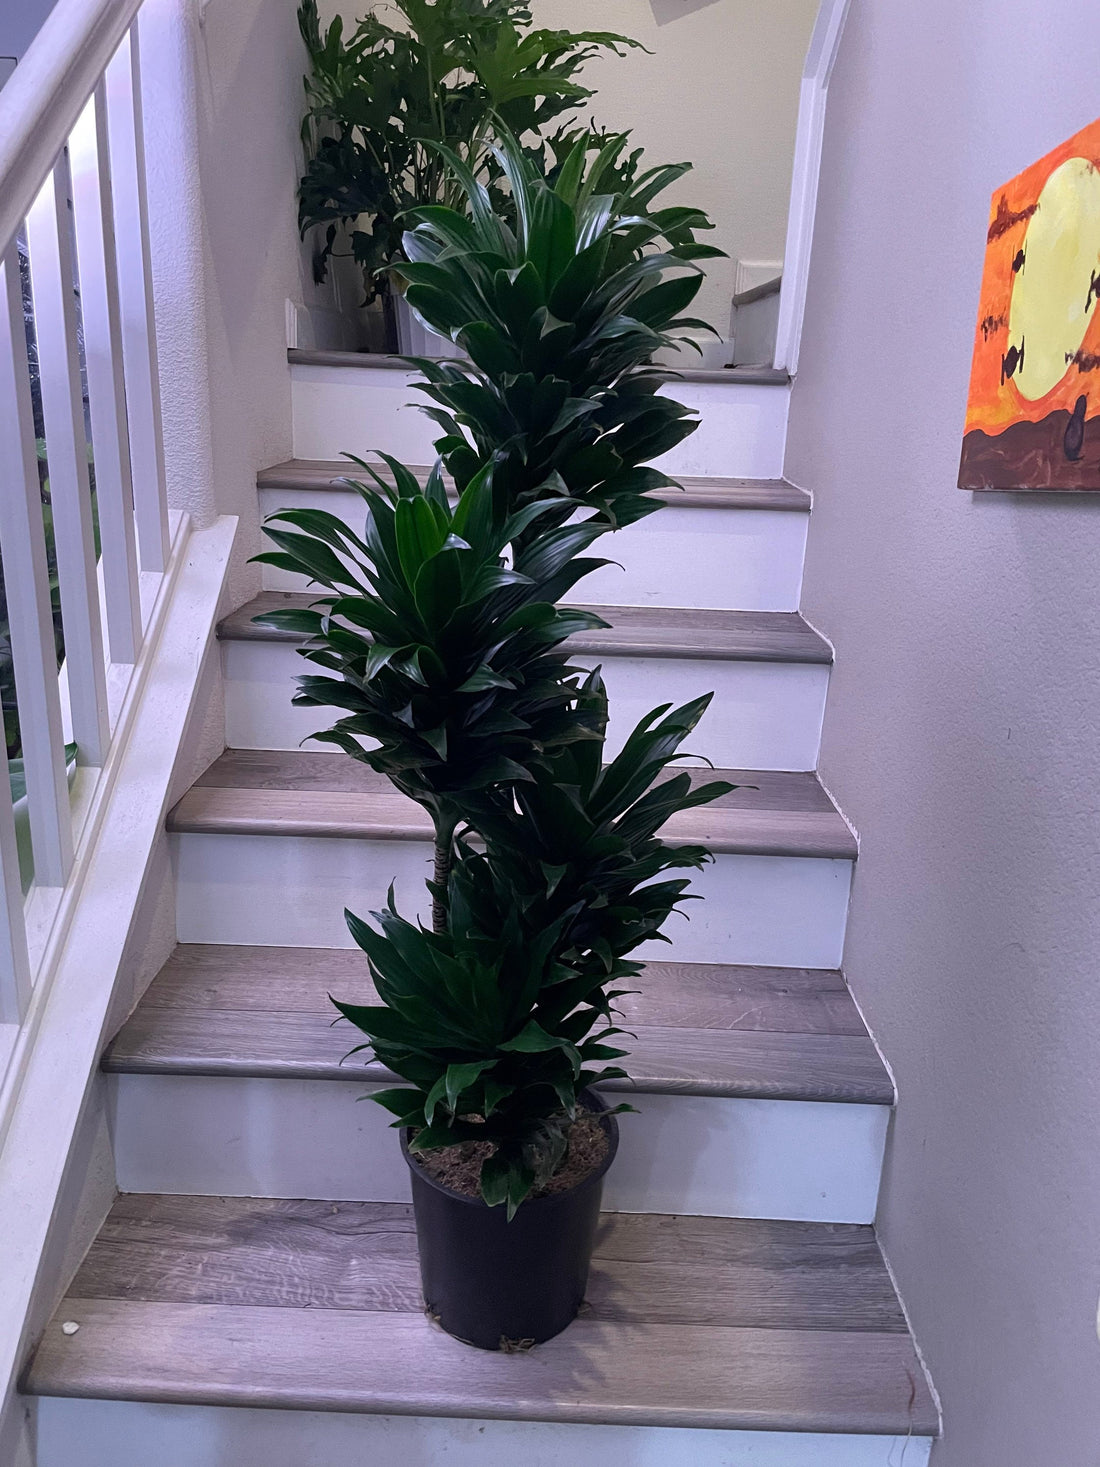 3 ft  -3 cane in pot  Janet Craig Compacta Dracaena-ships without pot-similar to photo not exact . 3ft is measured from bottom of pot